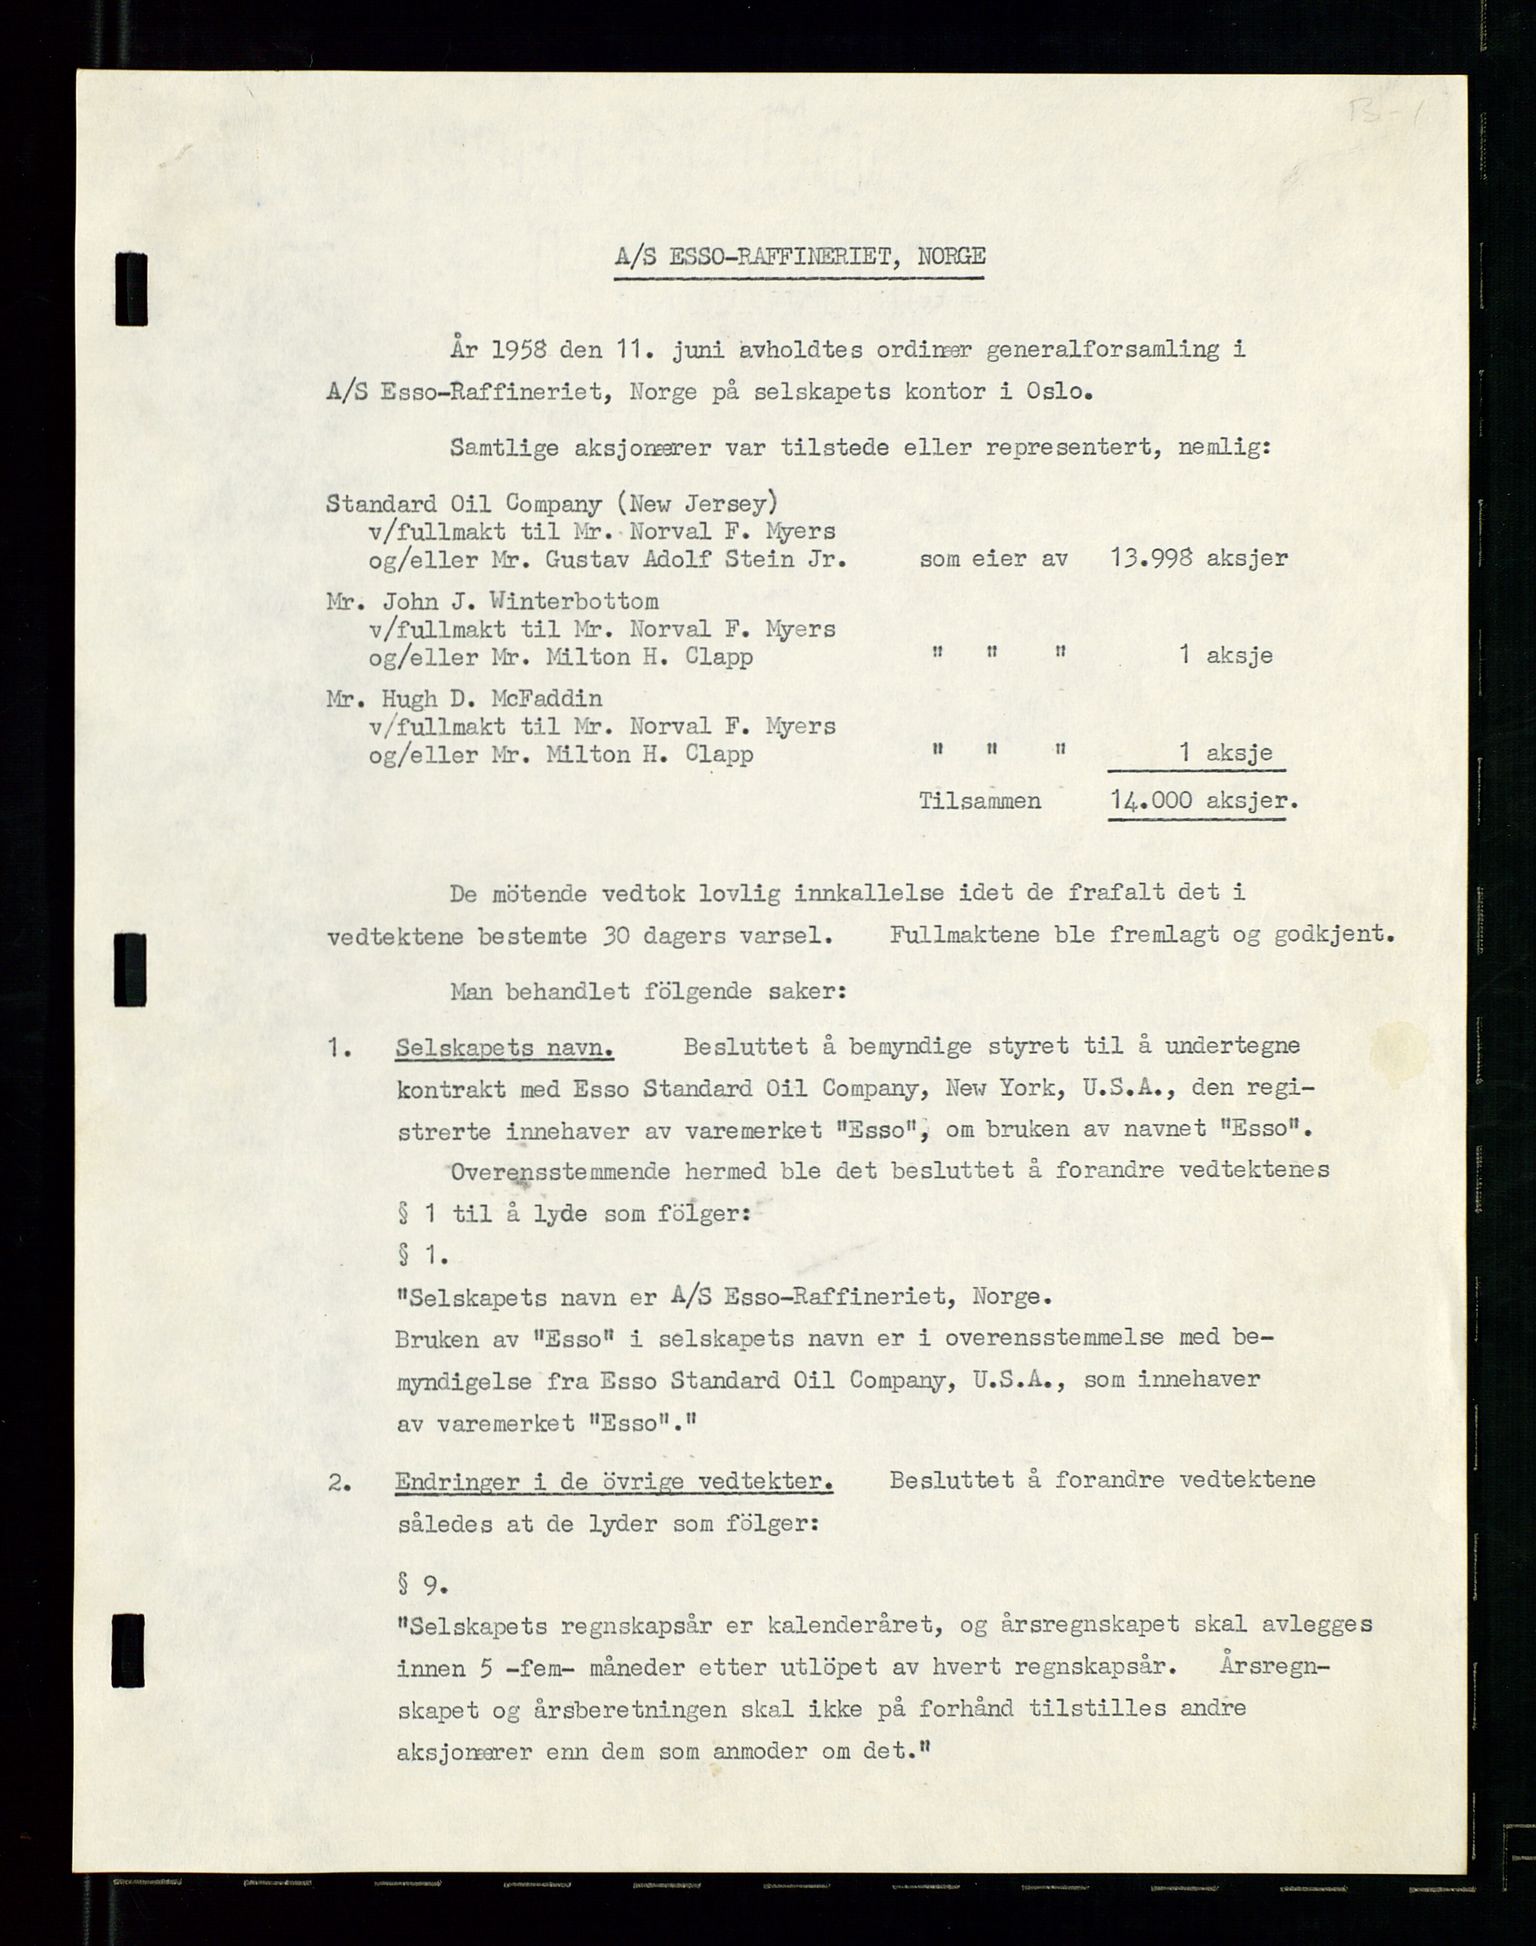 PA 1537 - A/S Essoraffineriet Norge, SAST/A-101957/A/Aa/L0001/0002: Styremøter / Shareholder meetings, board meetings, by laws (vedtekter), 1957-1960, p. 62